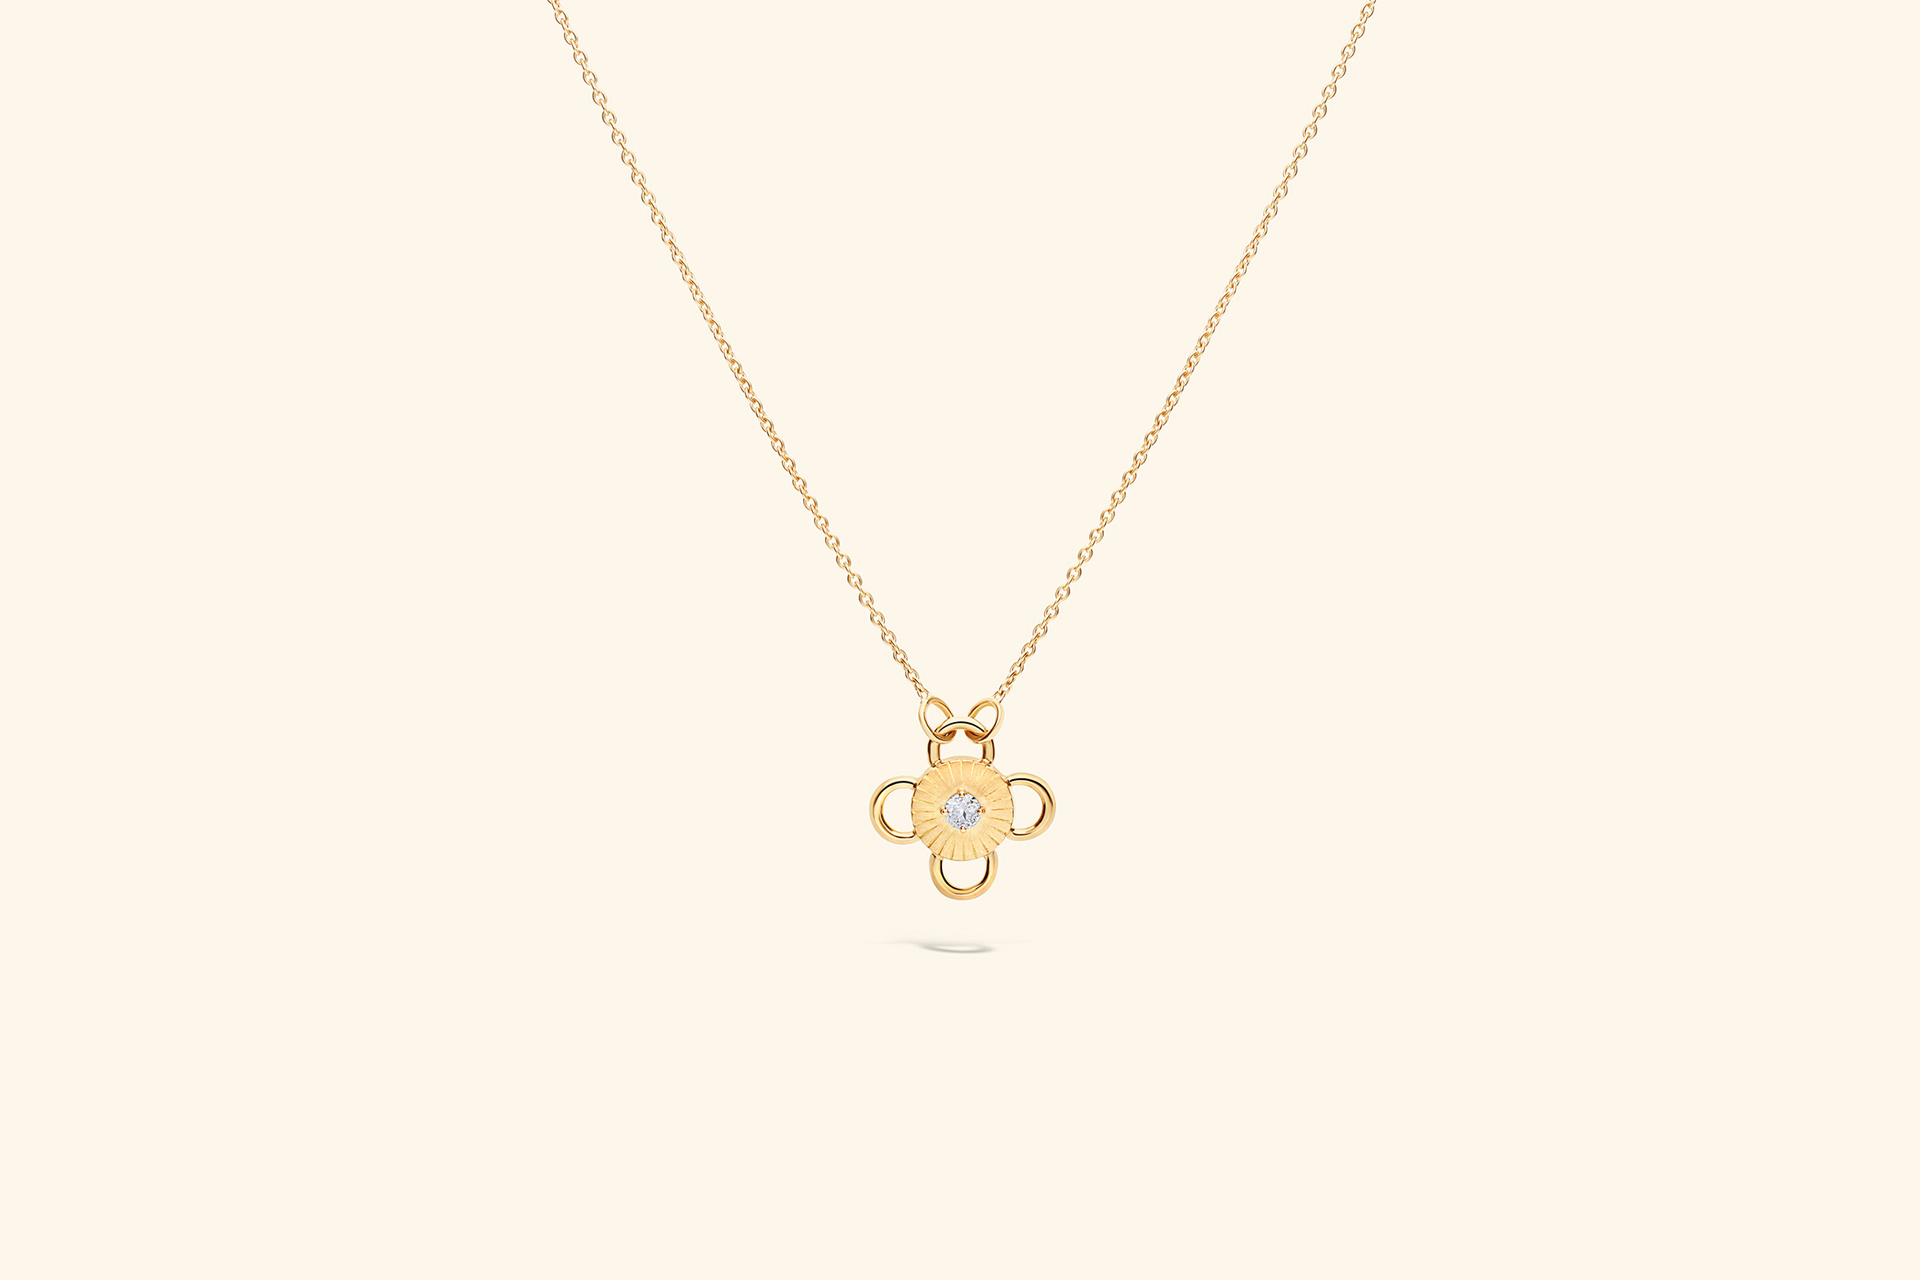 Baby Bolt Necklacea ~0.07 carat diamond set in recycled 18k yellow gold. 